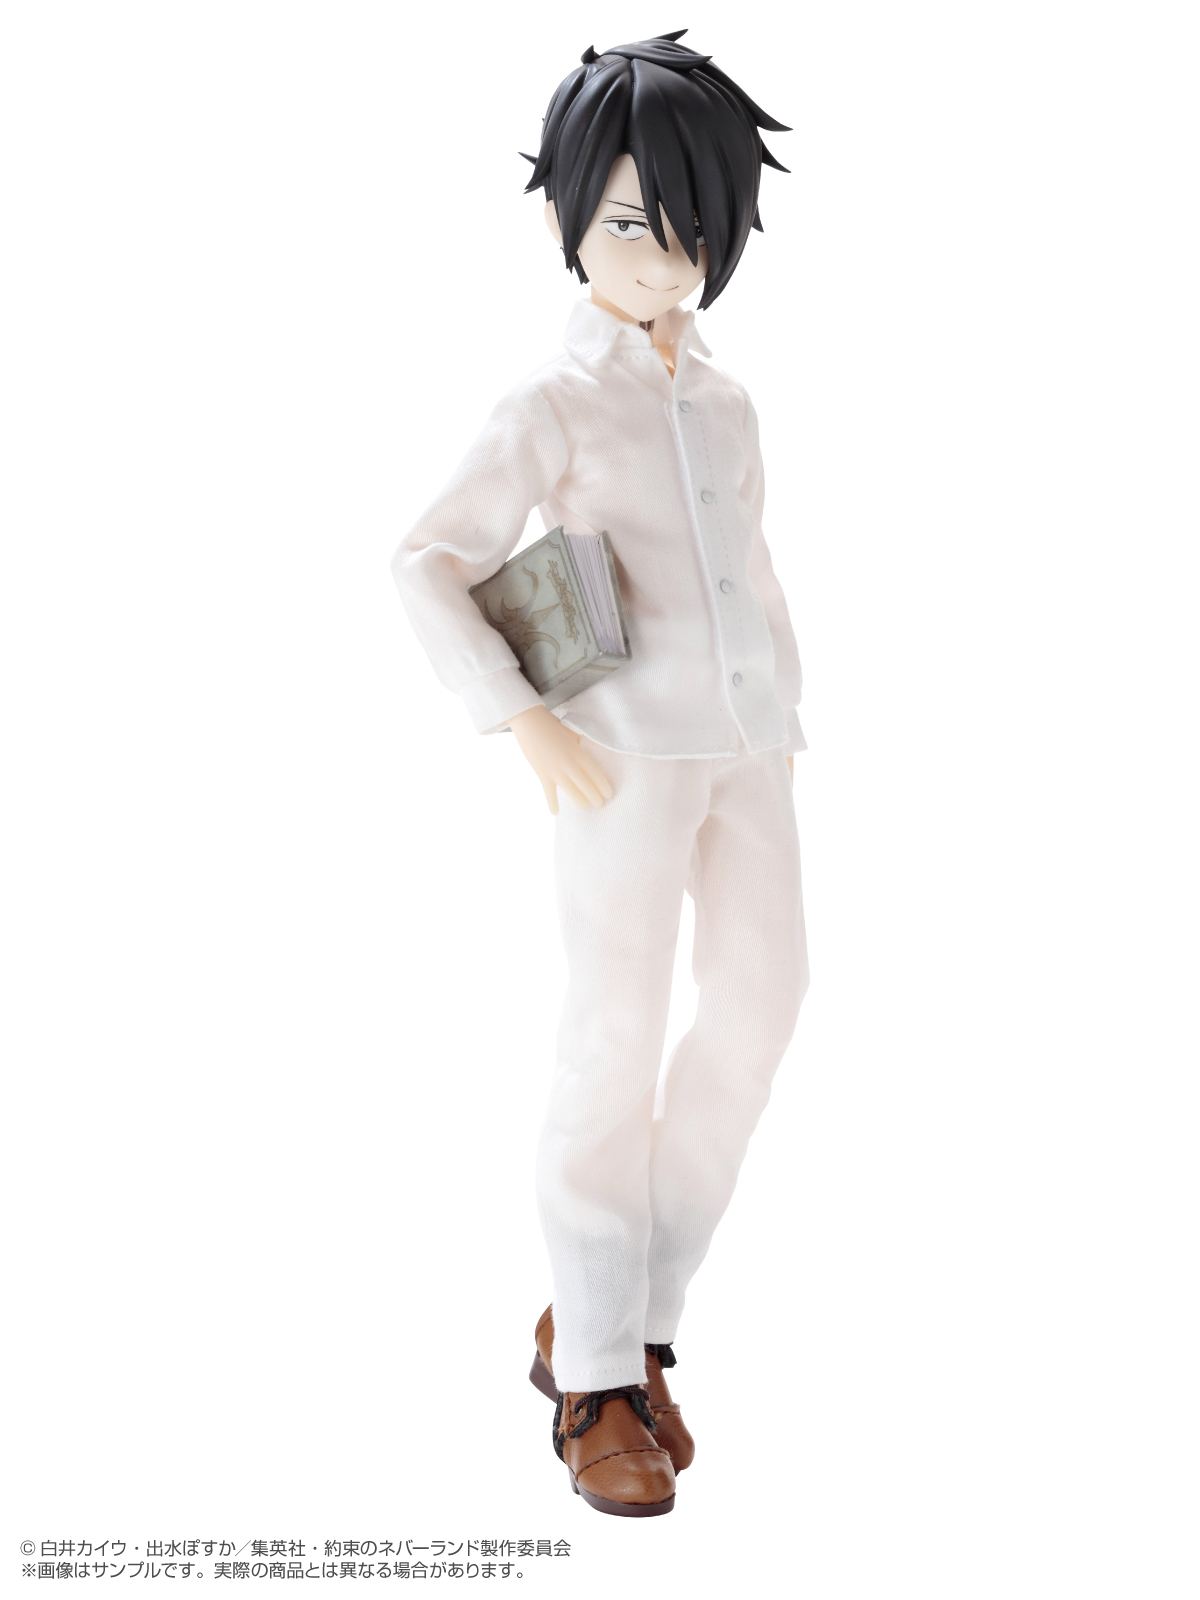 THE PROMISED NEVERLAND PURENEEMO CHARACTER SERIES 1/6 SCALE FASHION DOLL: RAY Azone